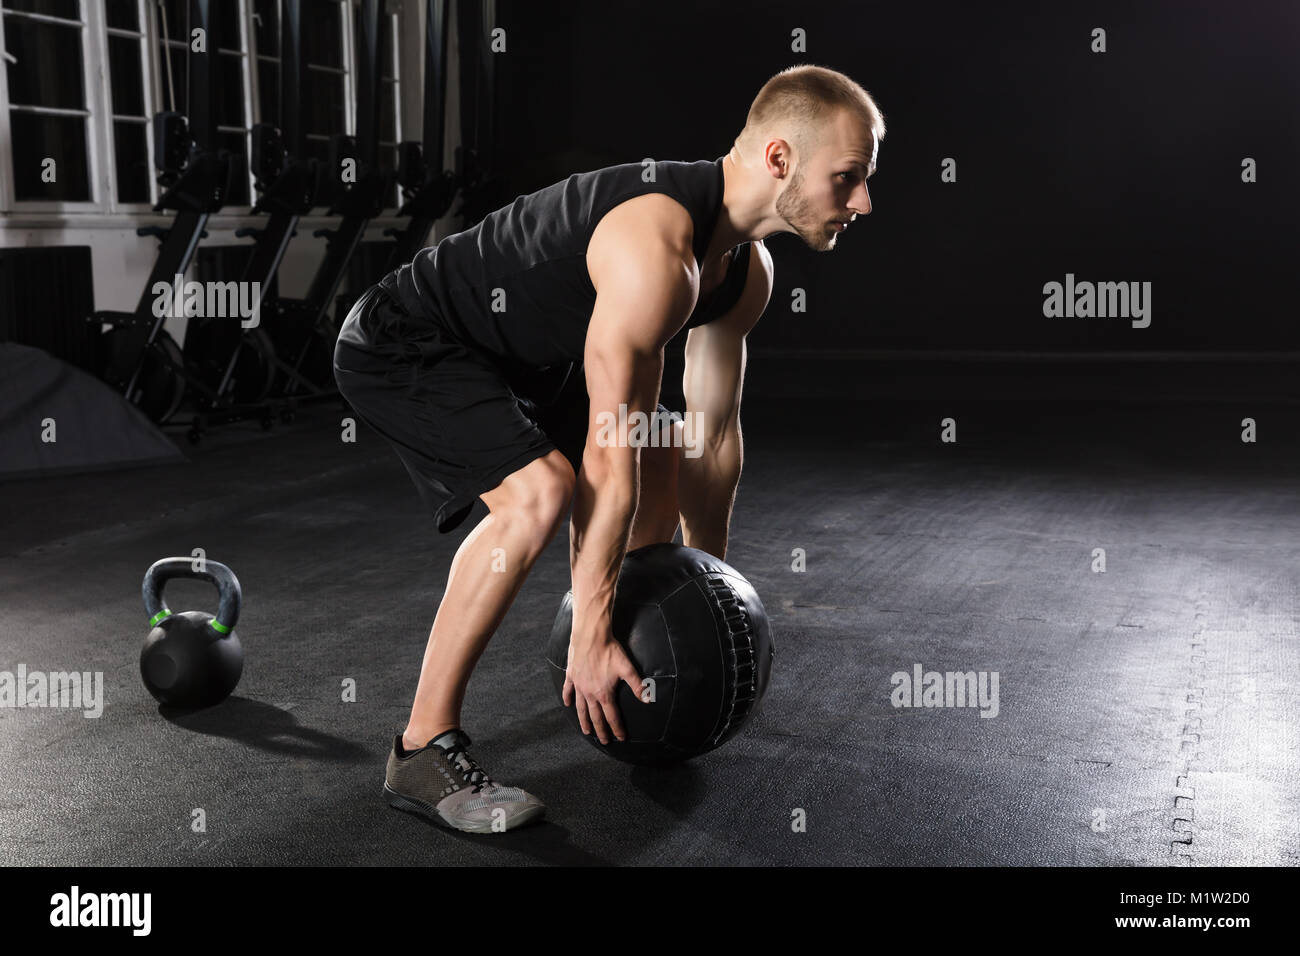 Young Athlete Man Doing Exercise With Medicine Ball In The Gym Stock Photo